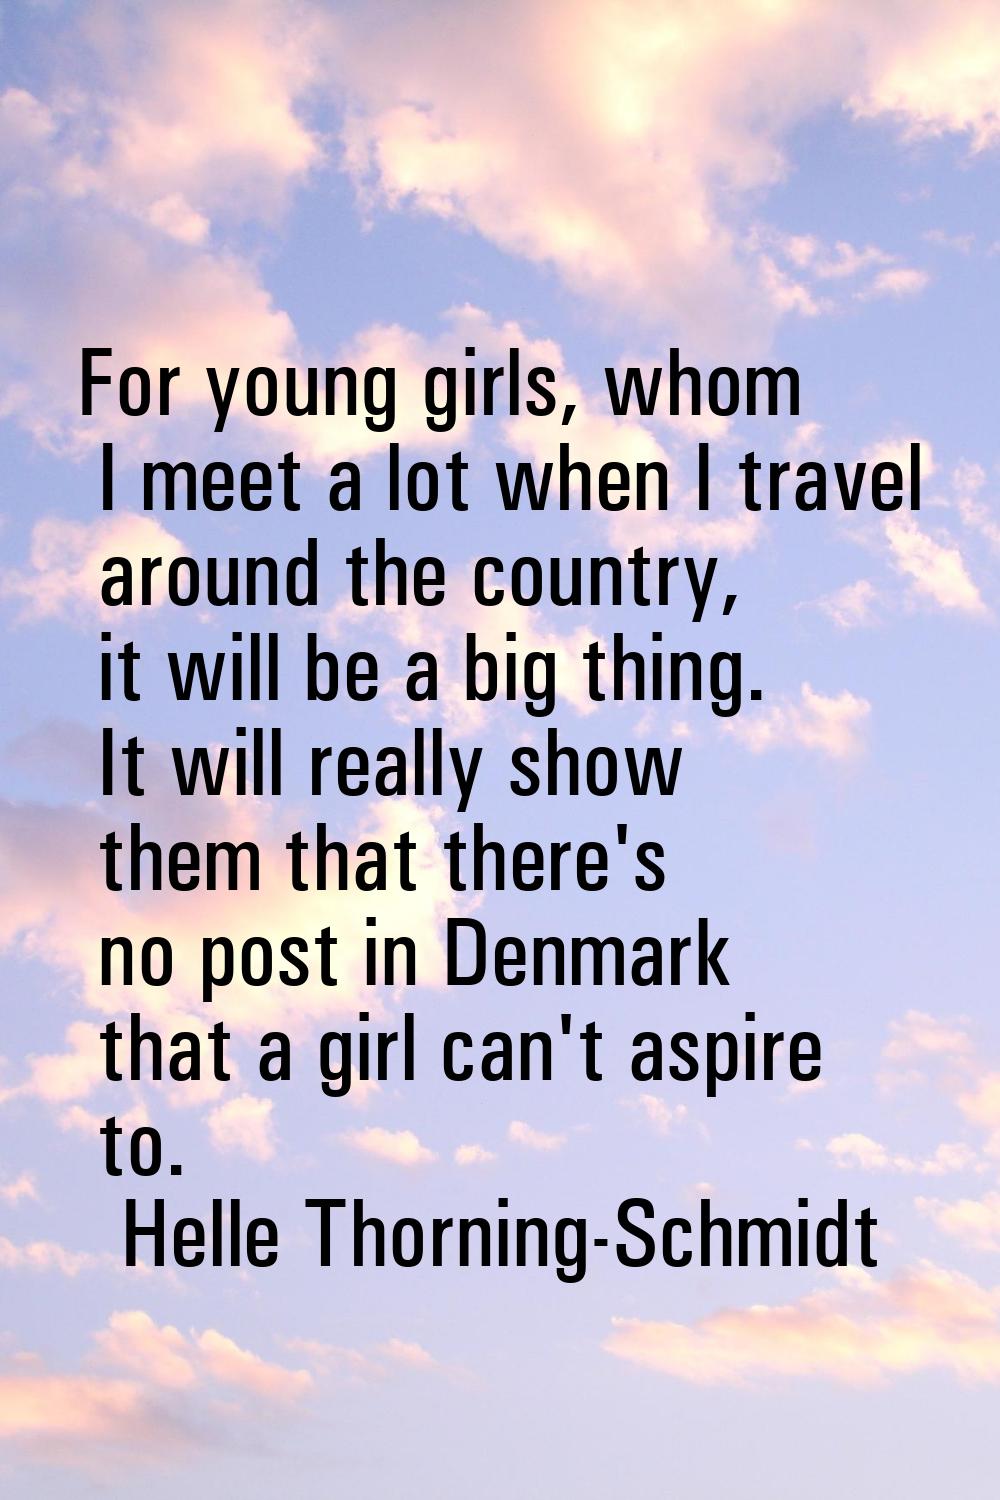 For young girls, whom I meet a lot when I travel around the country, it will be a big thing. It wil